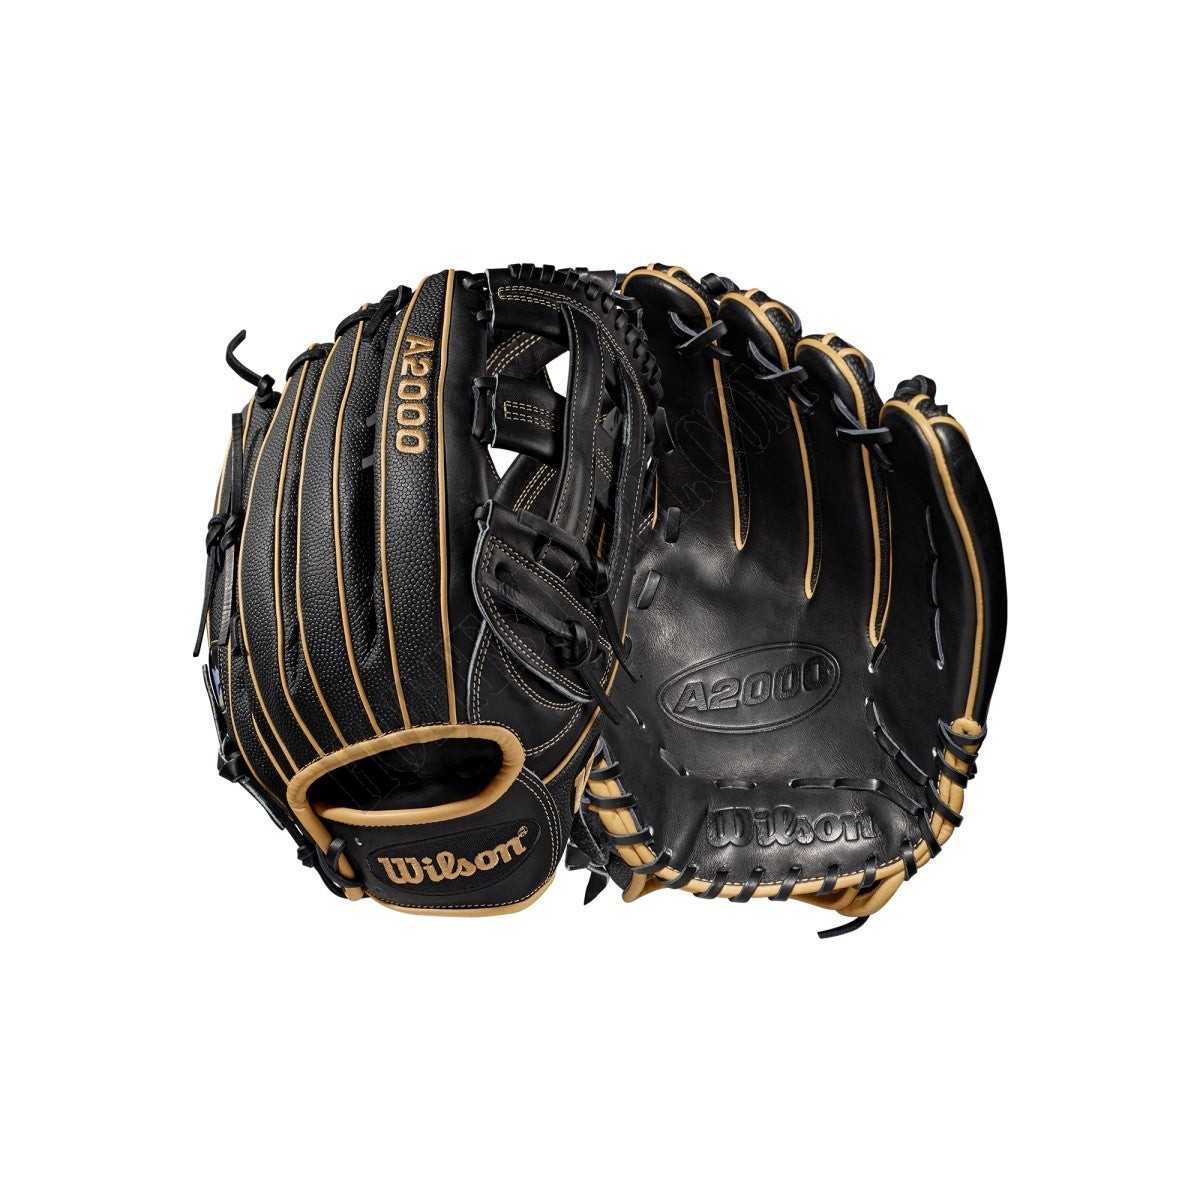 2019 A2000 1799 SuperSkin 12.75" Outfield Baseball Glove ● Wilson Promotions - 2019 A2000 1799 SuperSkin 12.75" Outfield Baseball Glove ● Wilson Promotions